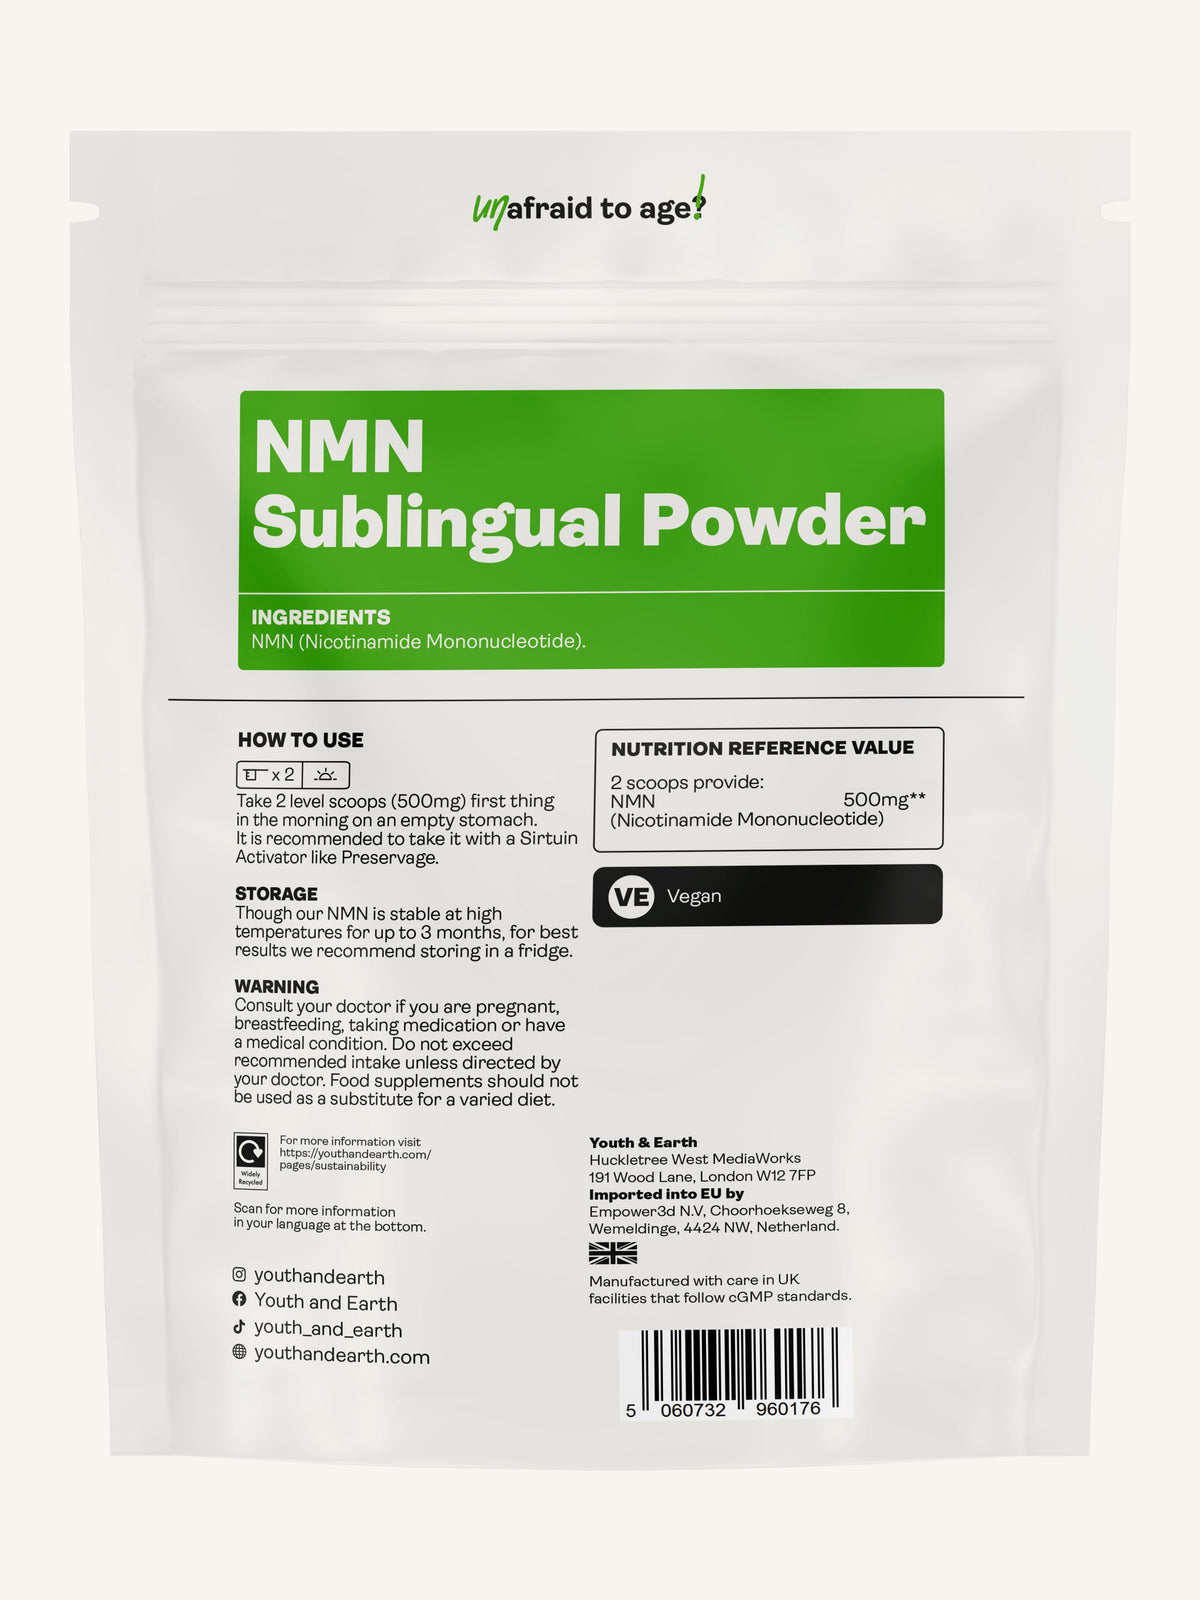 NMN Sublingual-Pulver youthandearth 